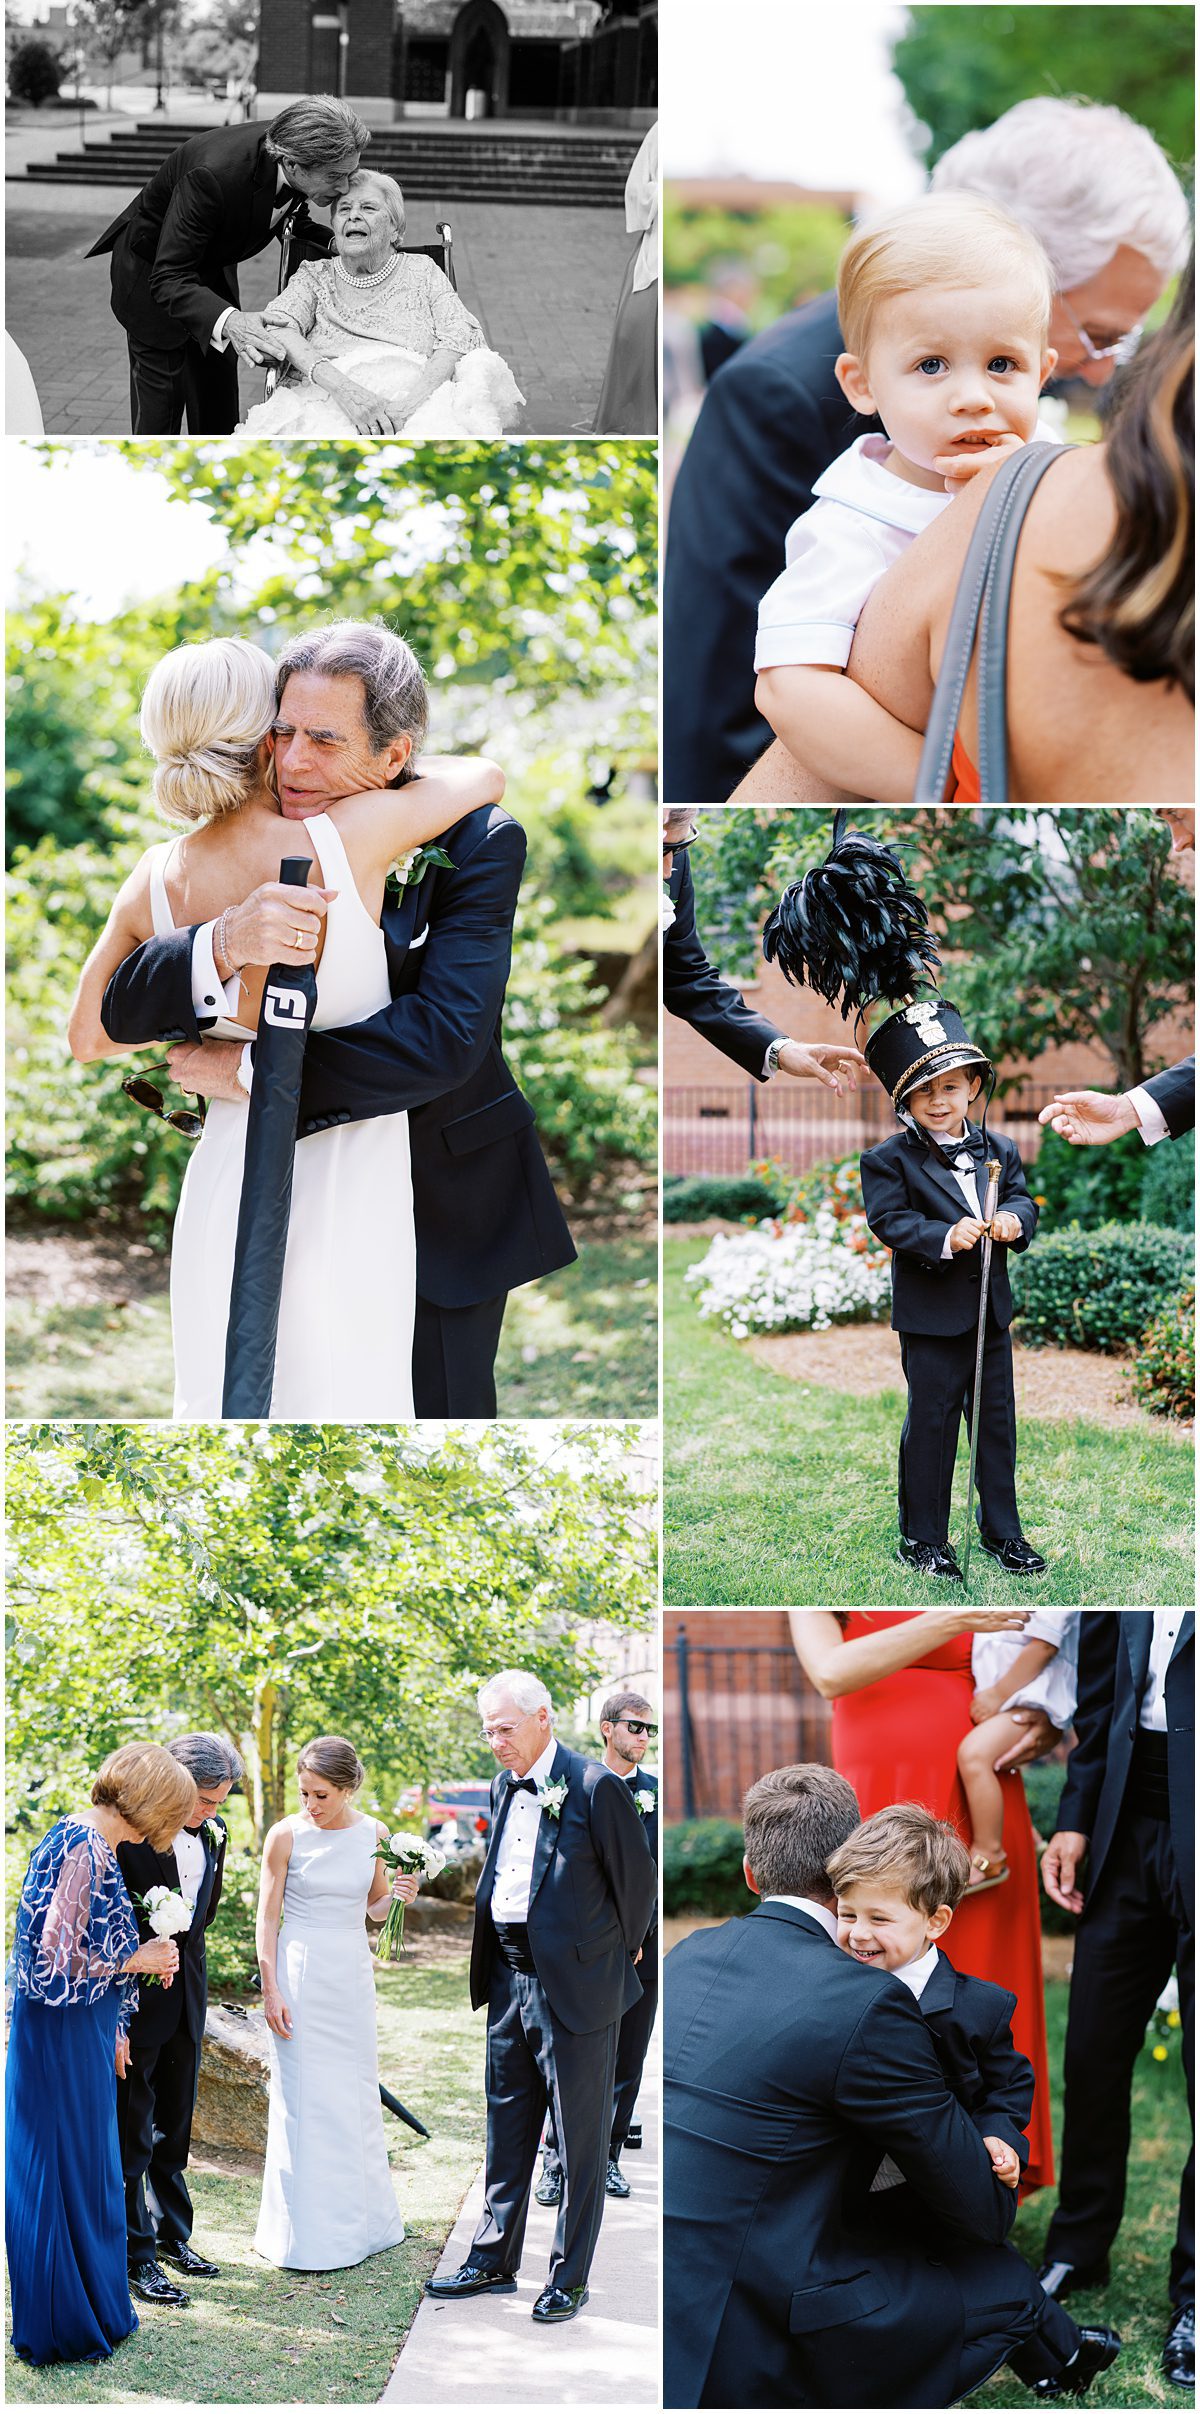 candid photos of families on a wedding day are just as important as smiling ones